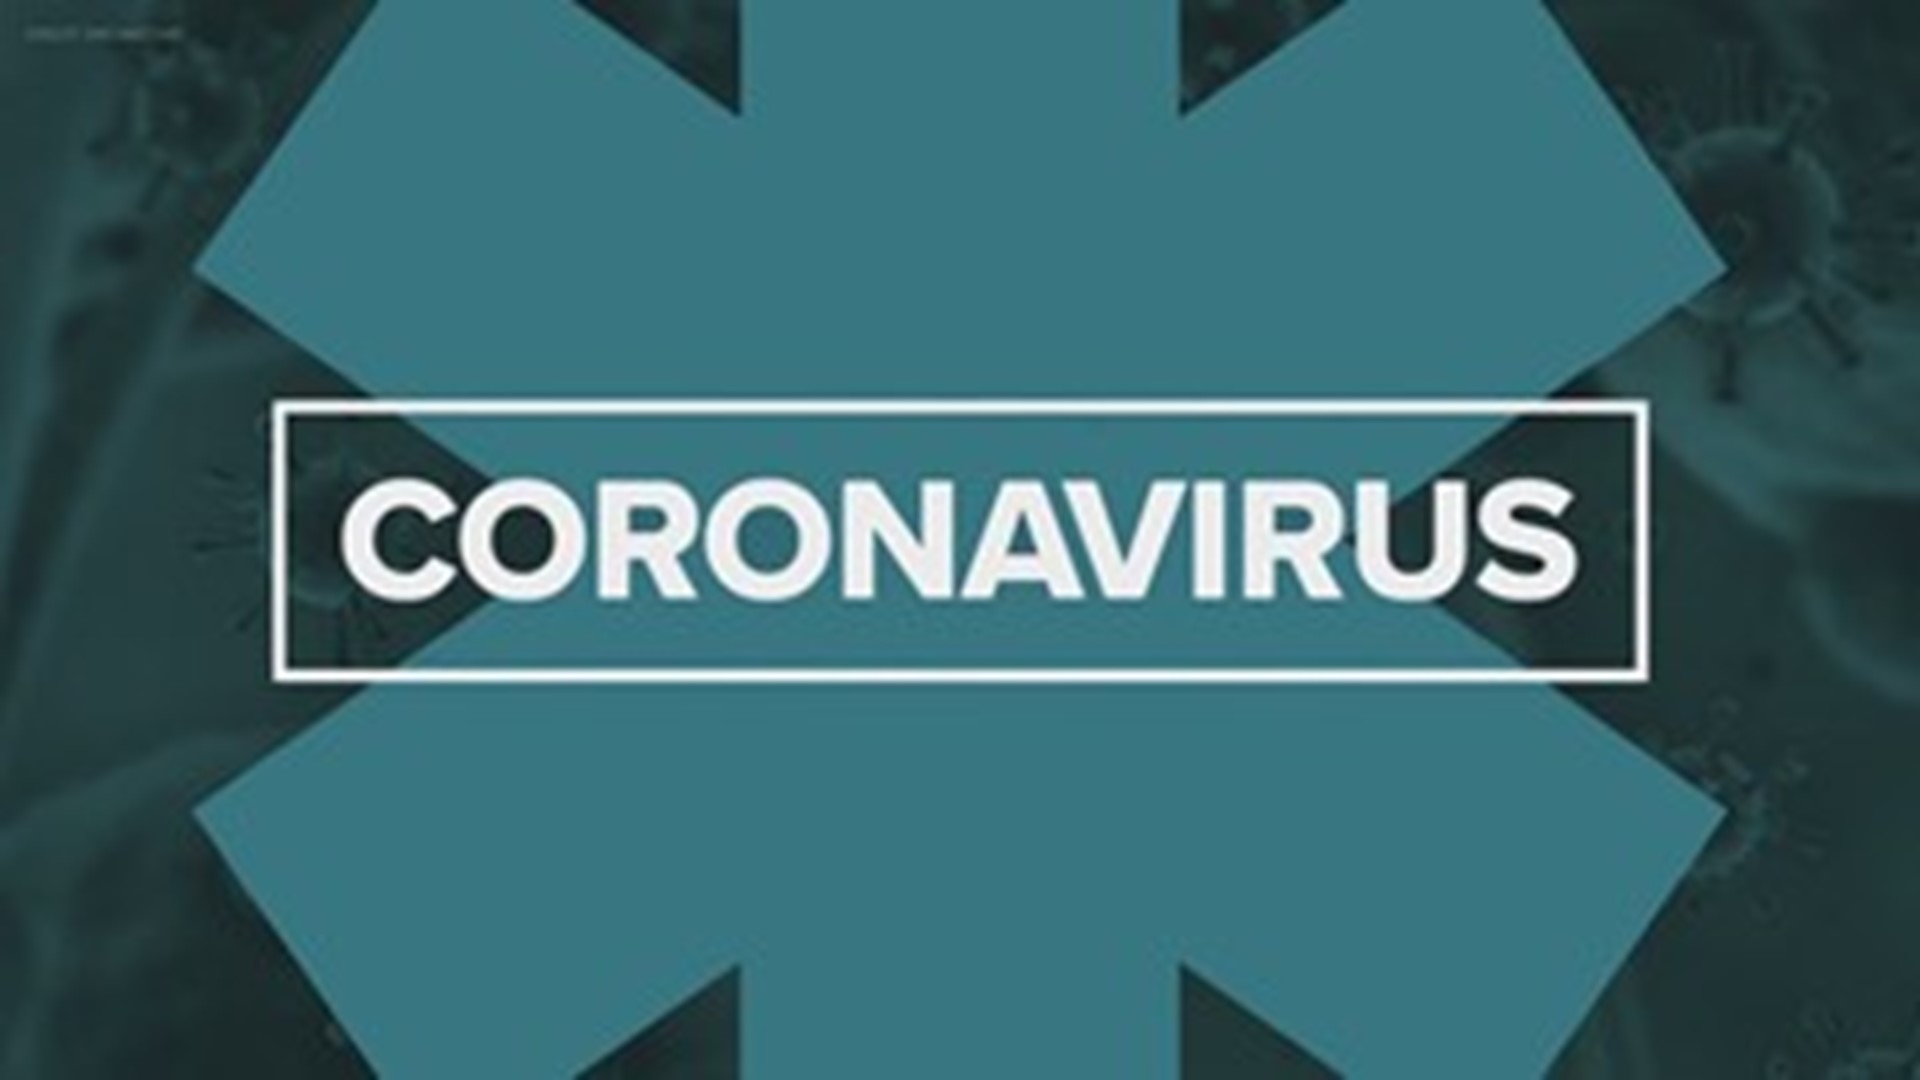 Indiana coronavirus updates: Preparing for NCAA basketball tournaments, Marion County numbers, Indiana numbers, Broad Ripple Avenue won't close in spring — 2/5/2021